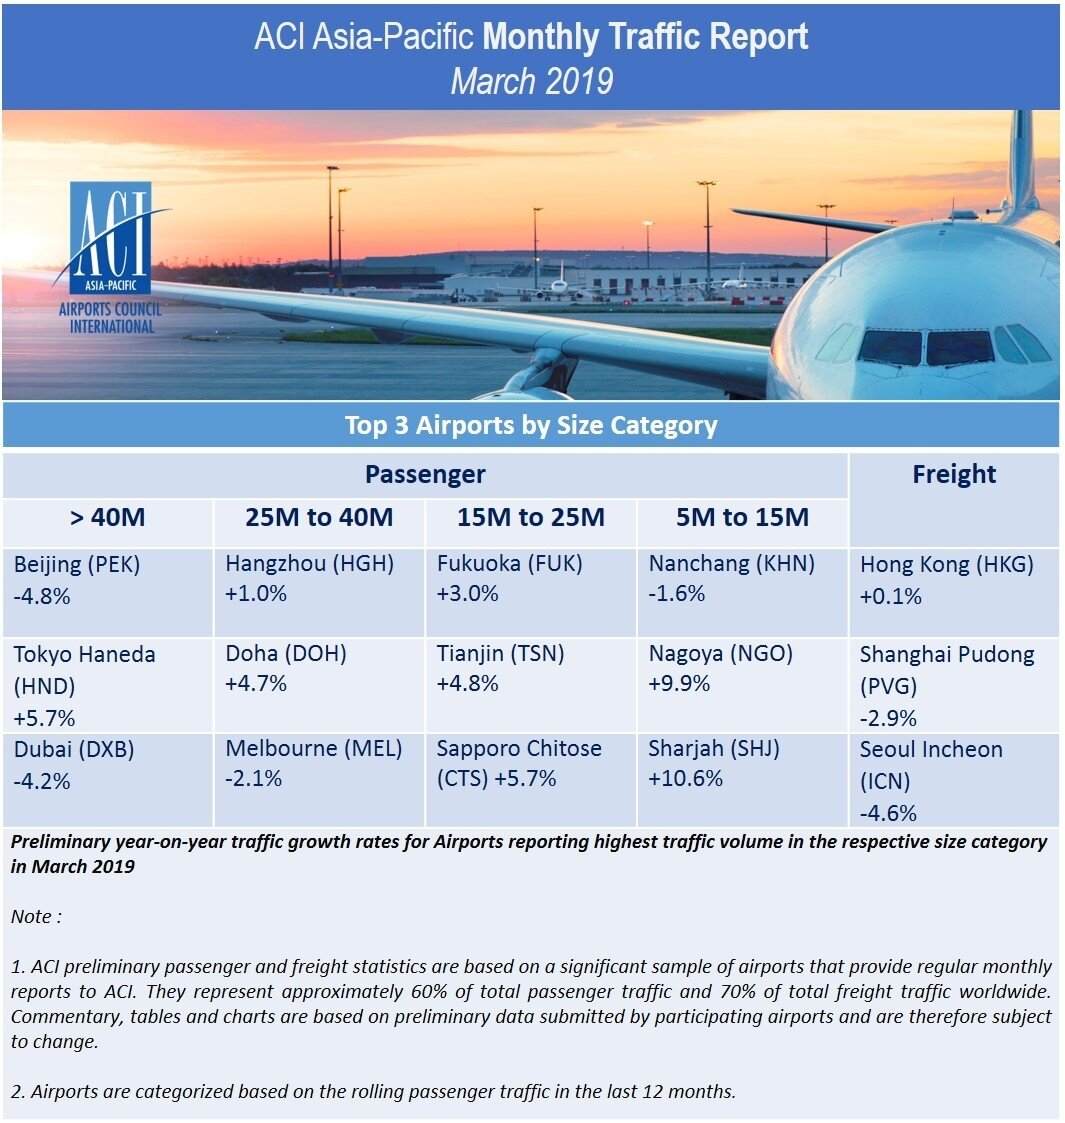 March 2019: Passengers up 2.0% in Asia-Pacific and down -0.3% in the Middle East